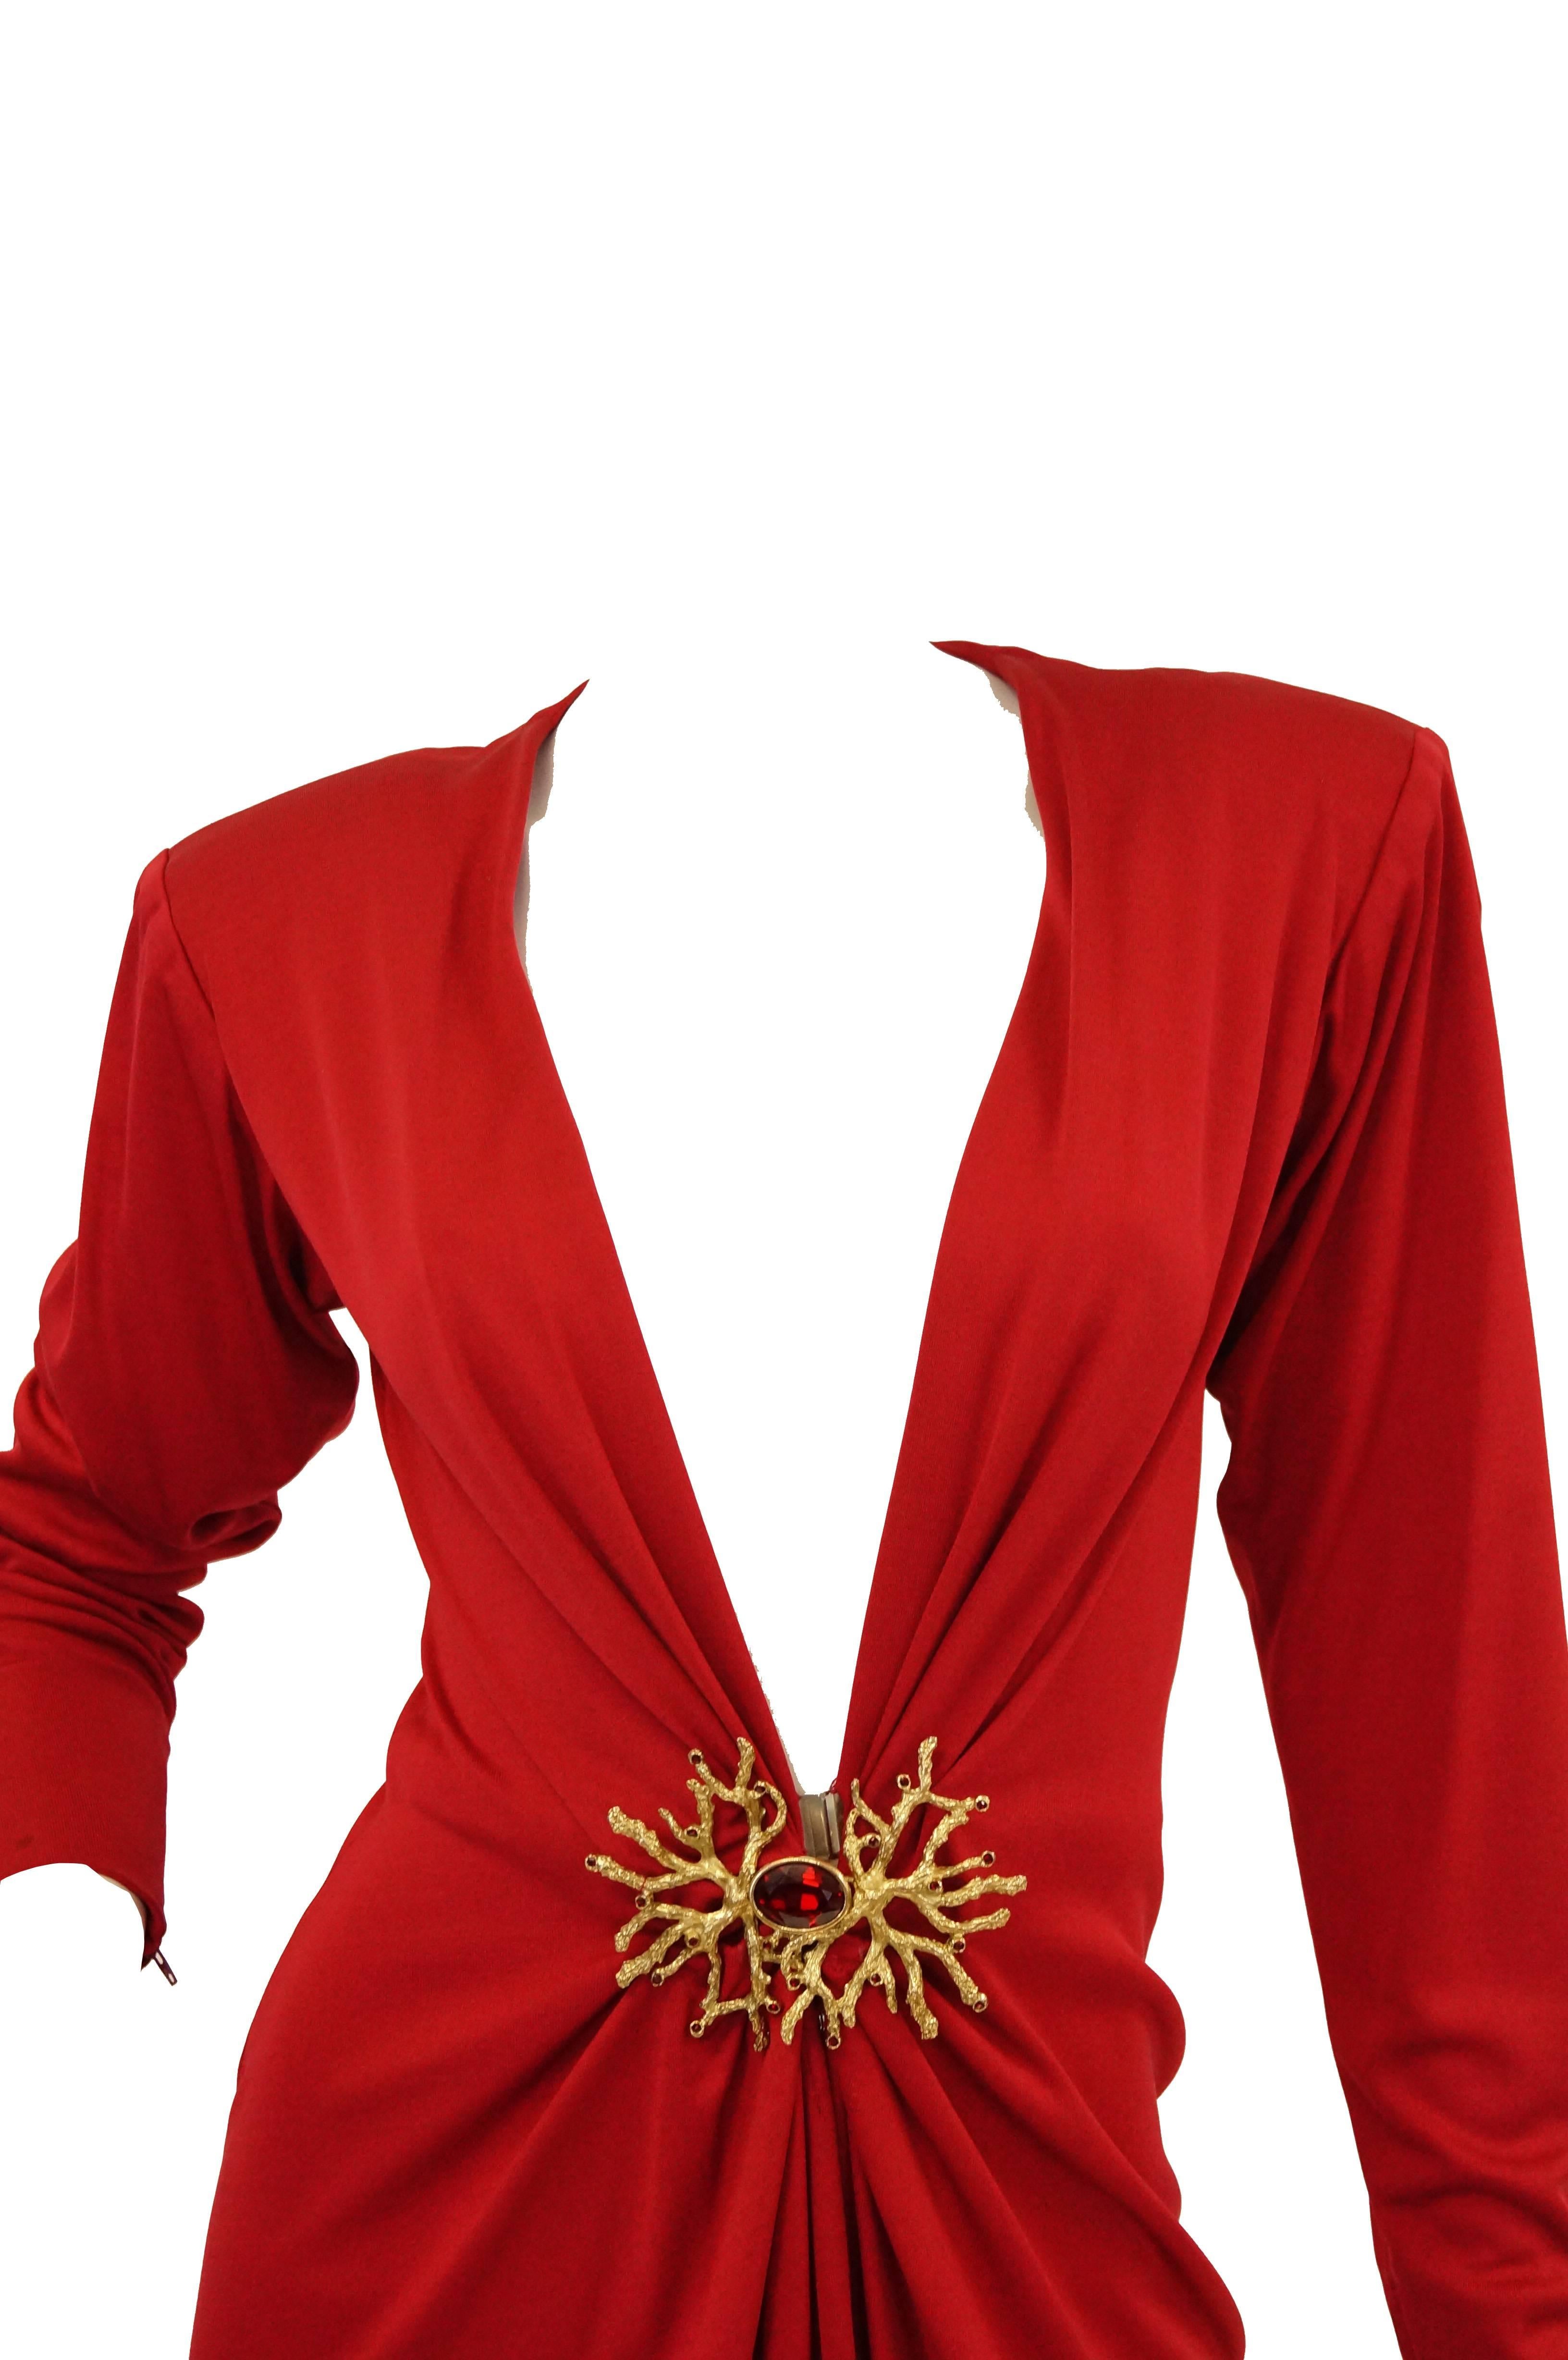 Yves Saint Laurent Silk Jersey Red Plunge Front Dress, 1980s In Excellent Condition In Houston, TX